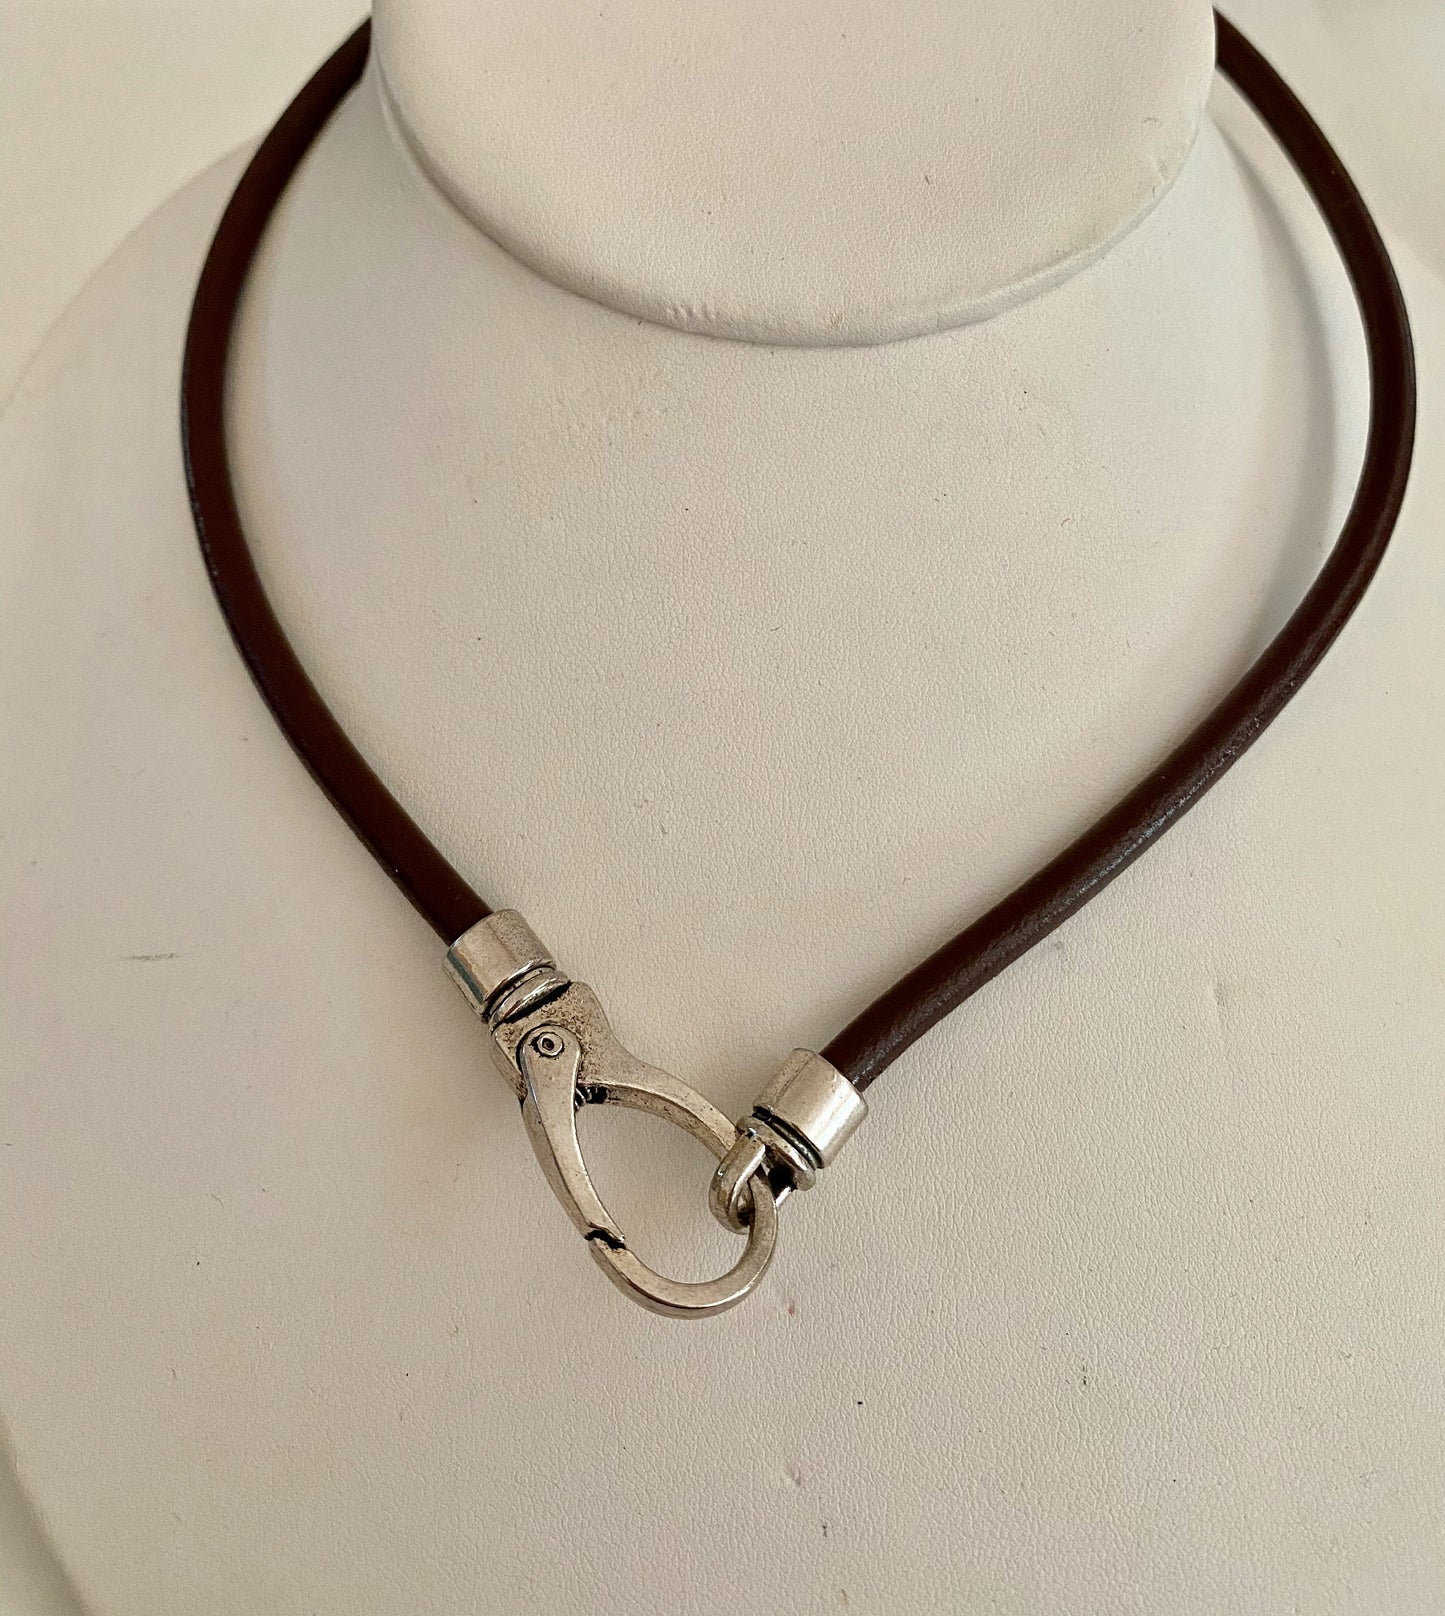 Leather Necklace. Black Italian leather choker necklace fashioned with a center silver large lobster and loop clasp.